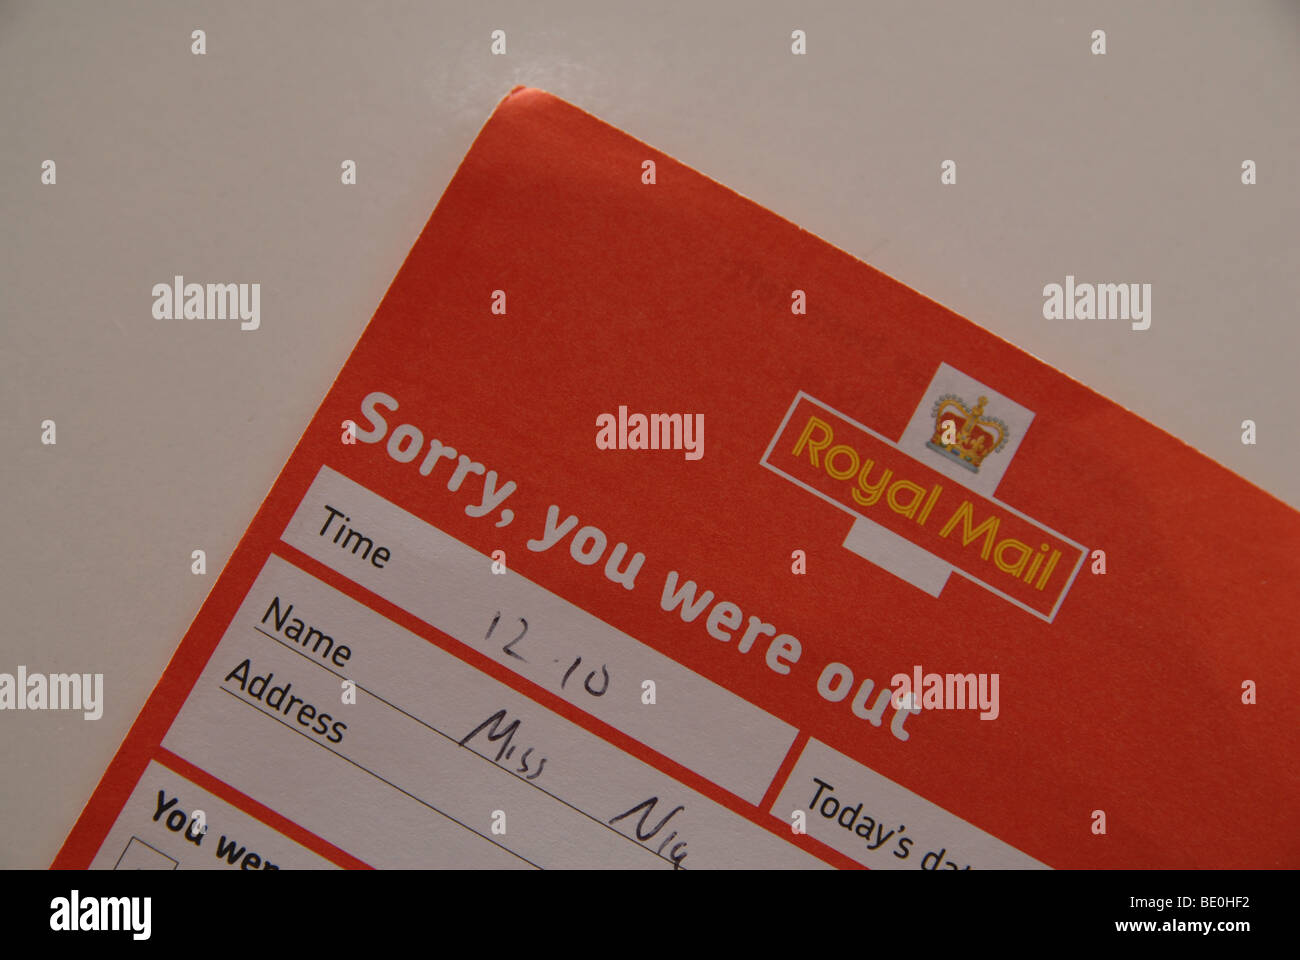 Royal Mail - Sorry you were out card for a missed delivery Stock Photo